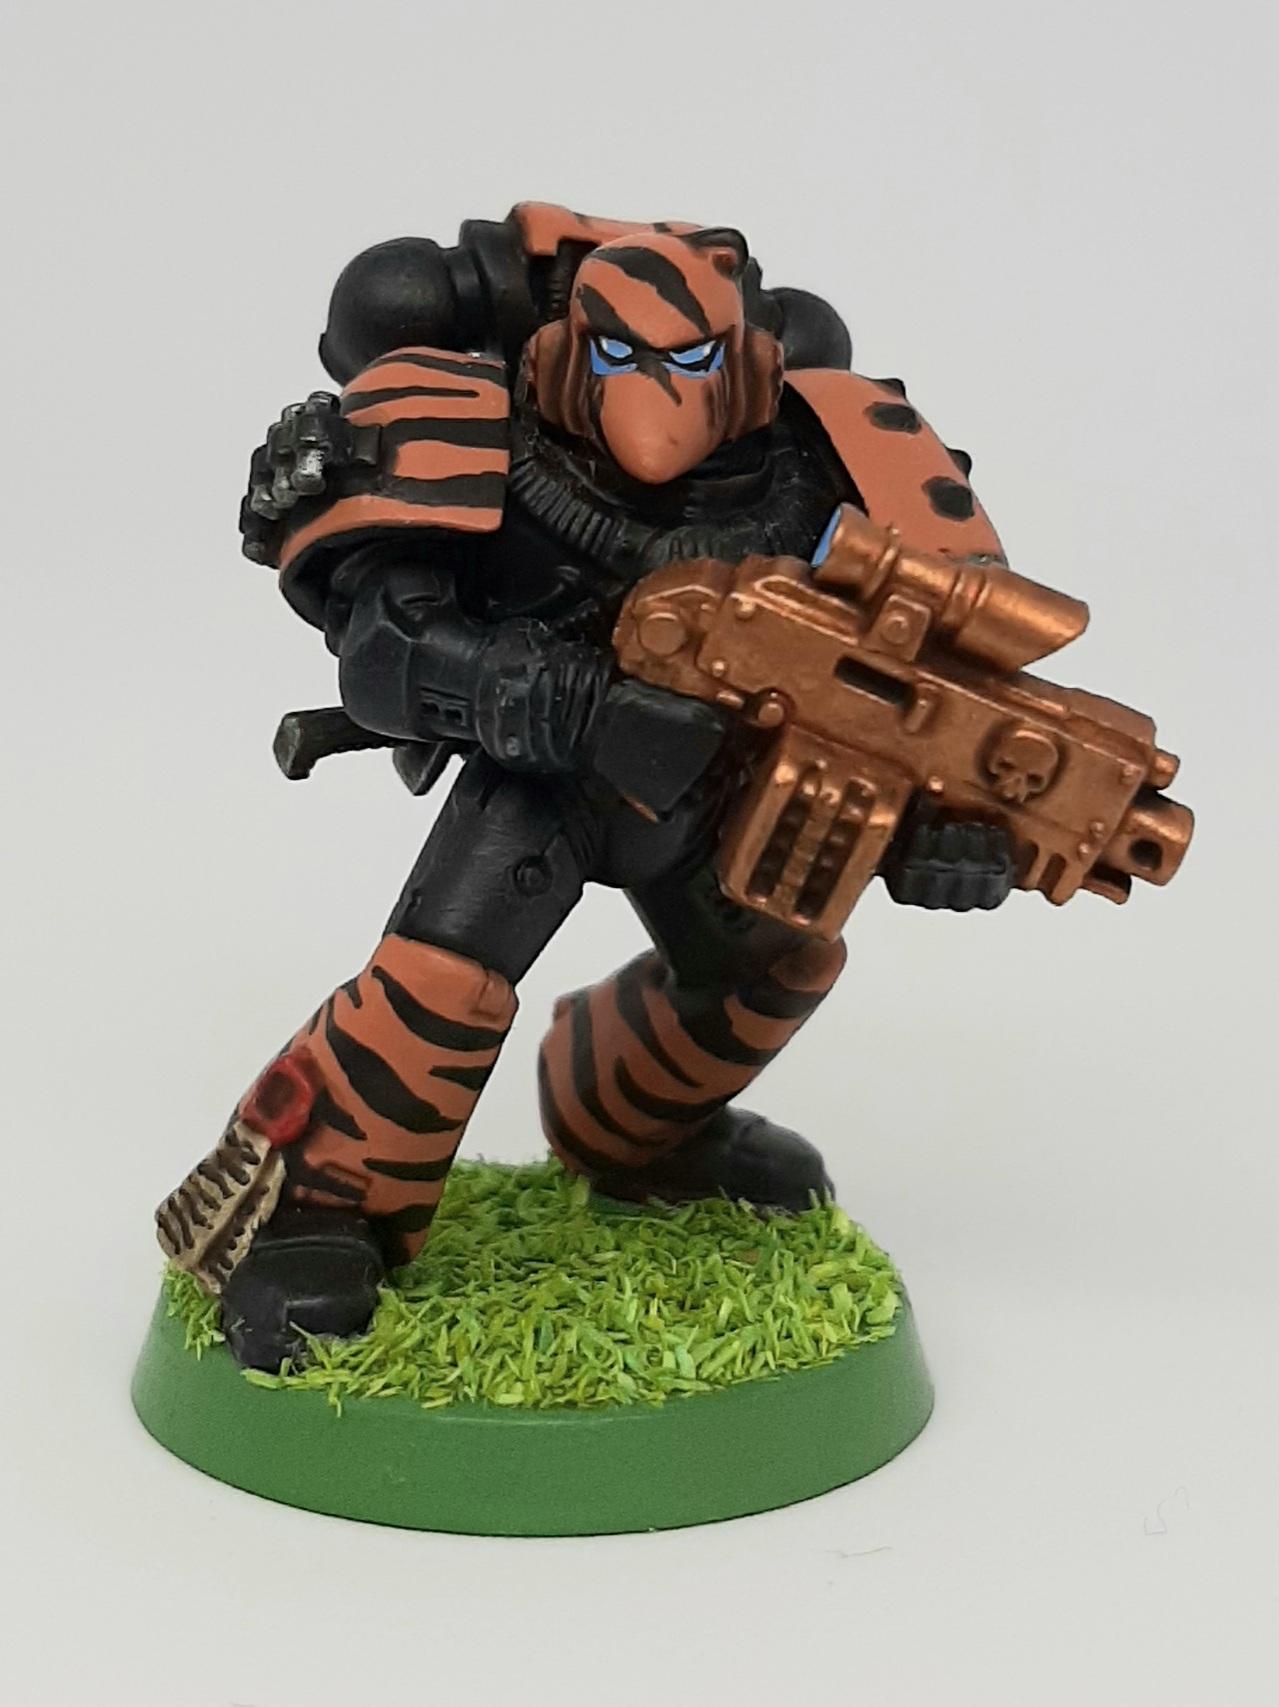 Adeptus, Ammo, Ammunition, Artificer, Astartes, Bolter, Boltgun, Camouflage, Conversion, Custom, Fighting, Forest, Ghuyarashtra, Issue, Jungle, Kitbash, Knife, Rounds, Space, Space Marines, Special, Sternguard, Tigers, Unique, Veda, Veteran